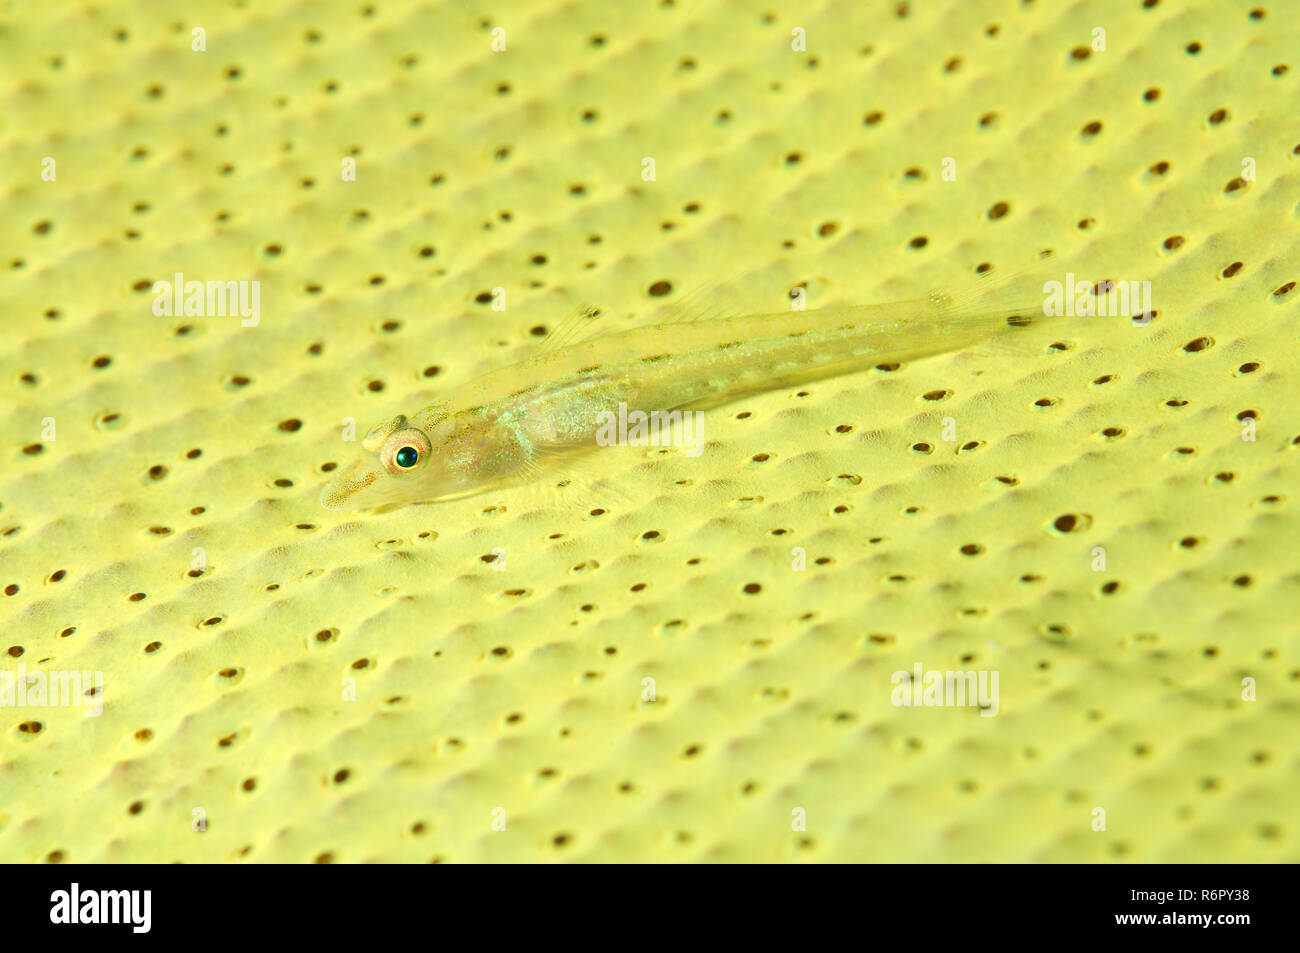 Large whip goby or White-line Seawhip Goby (Bryaninops amplus) Bohol Sea, Philippin, Southeast Asia Stock Photo